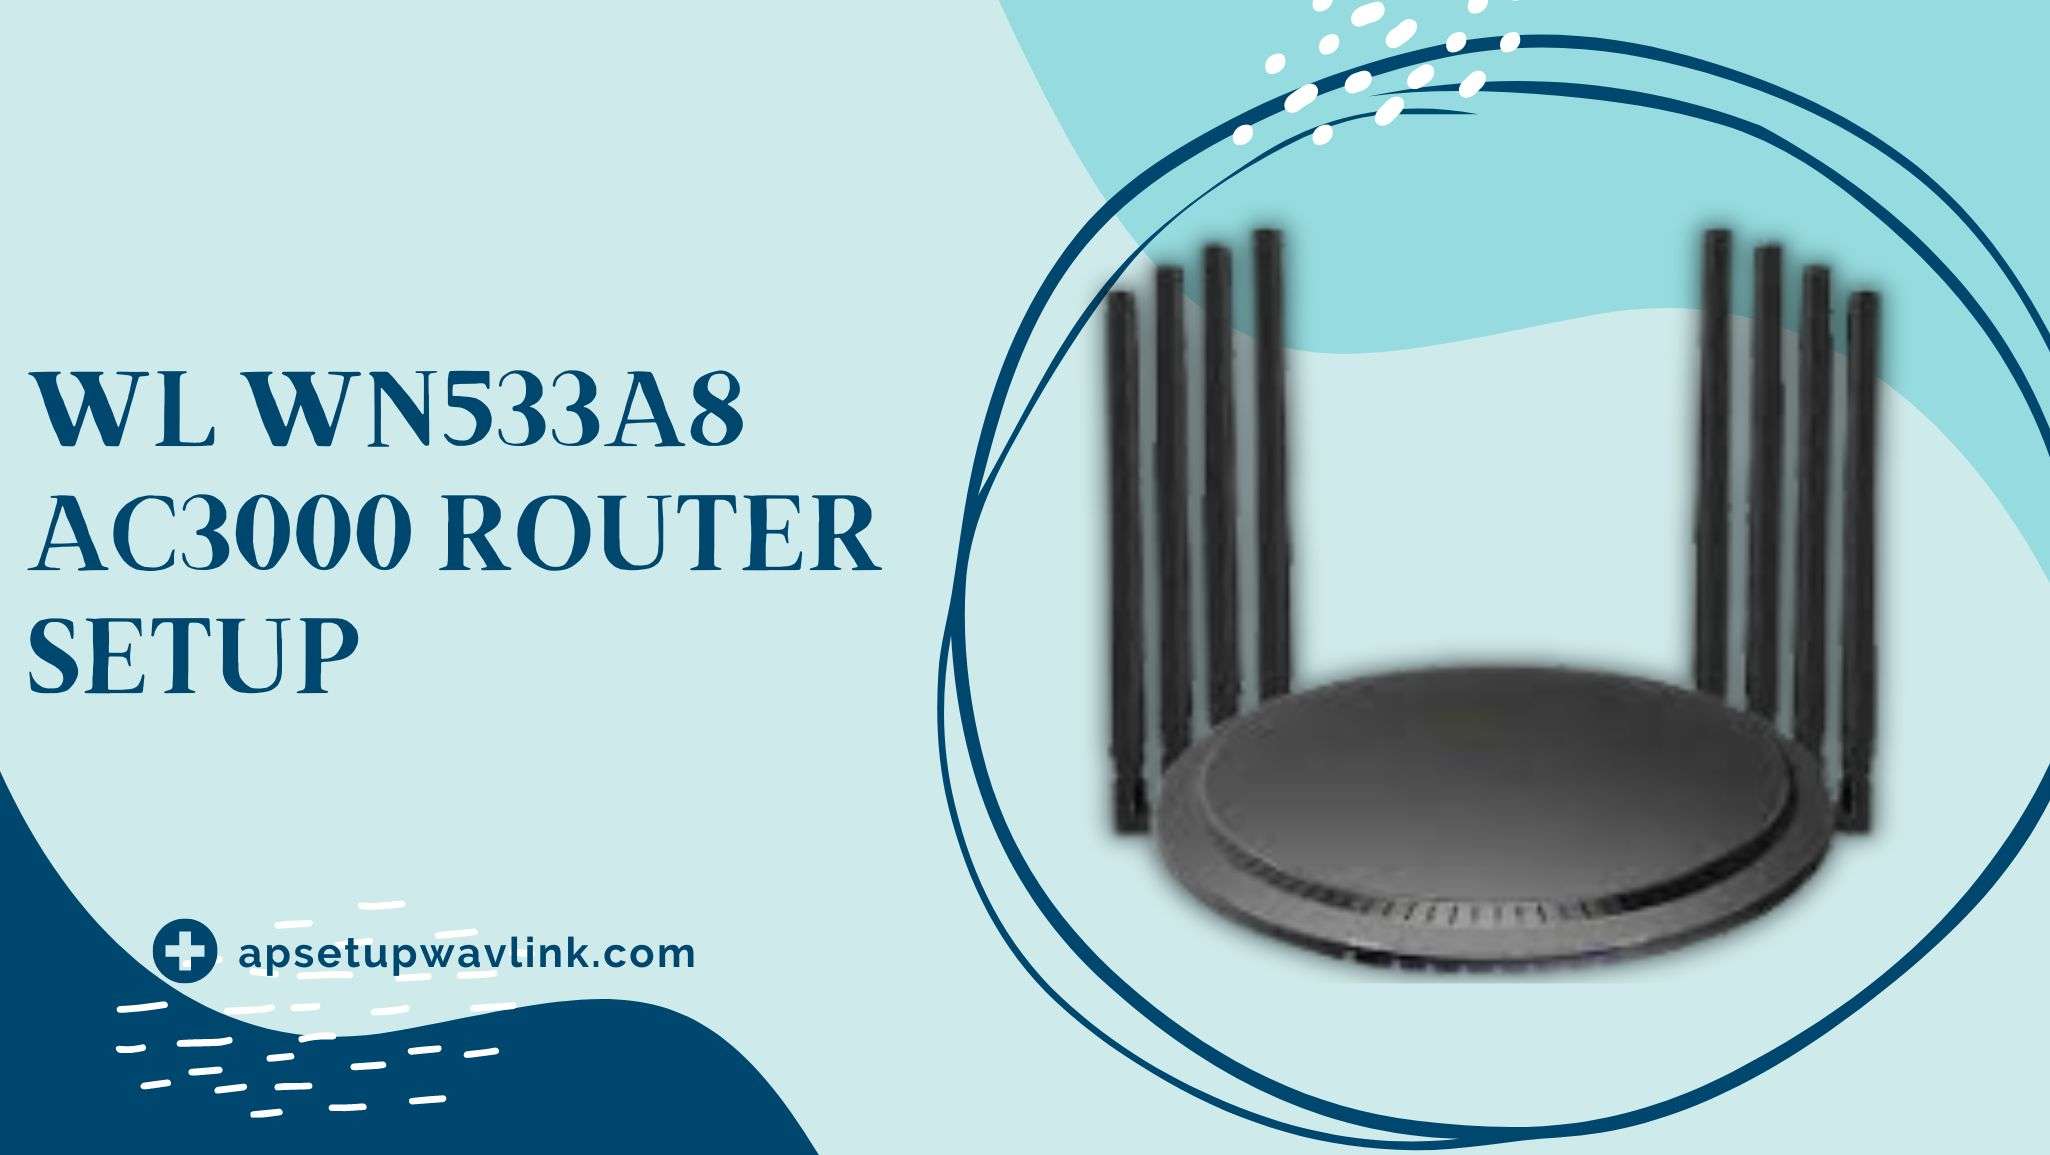 You are currently viewing WL WN533A8 AC3000 Router Setup